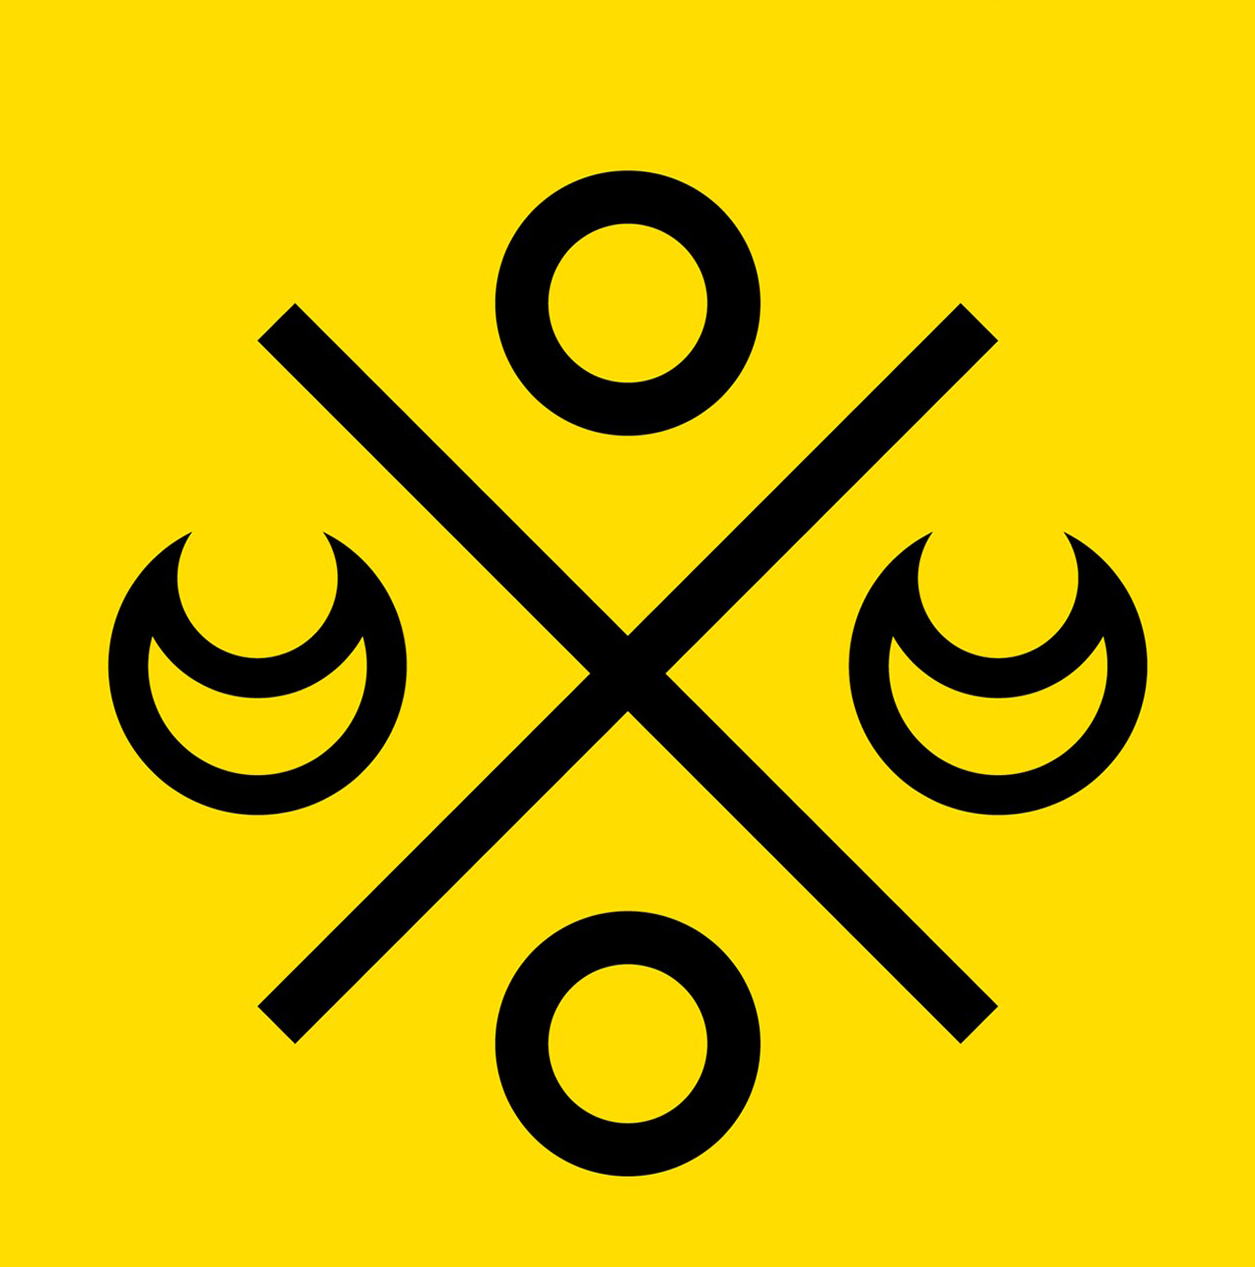 A black merchants' mark over a yellow background. Taken from the front cover of Logo Rewind.